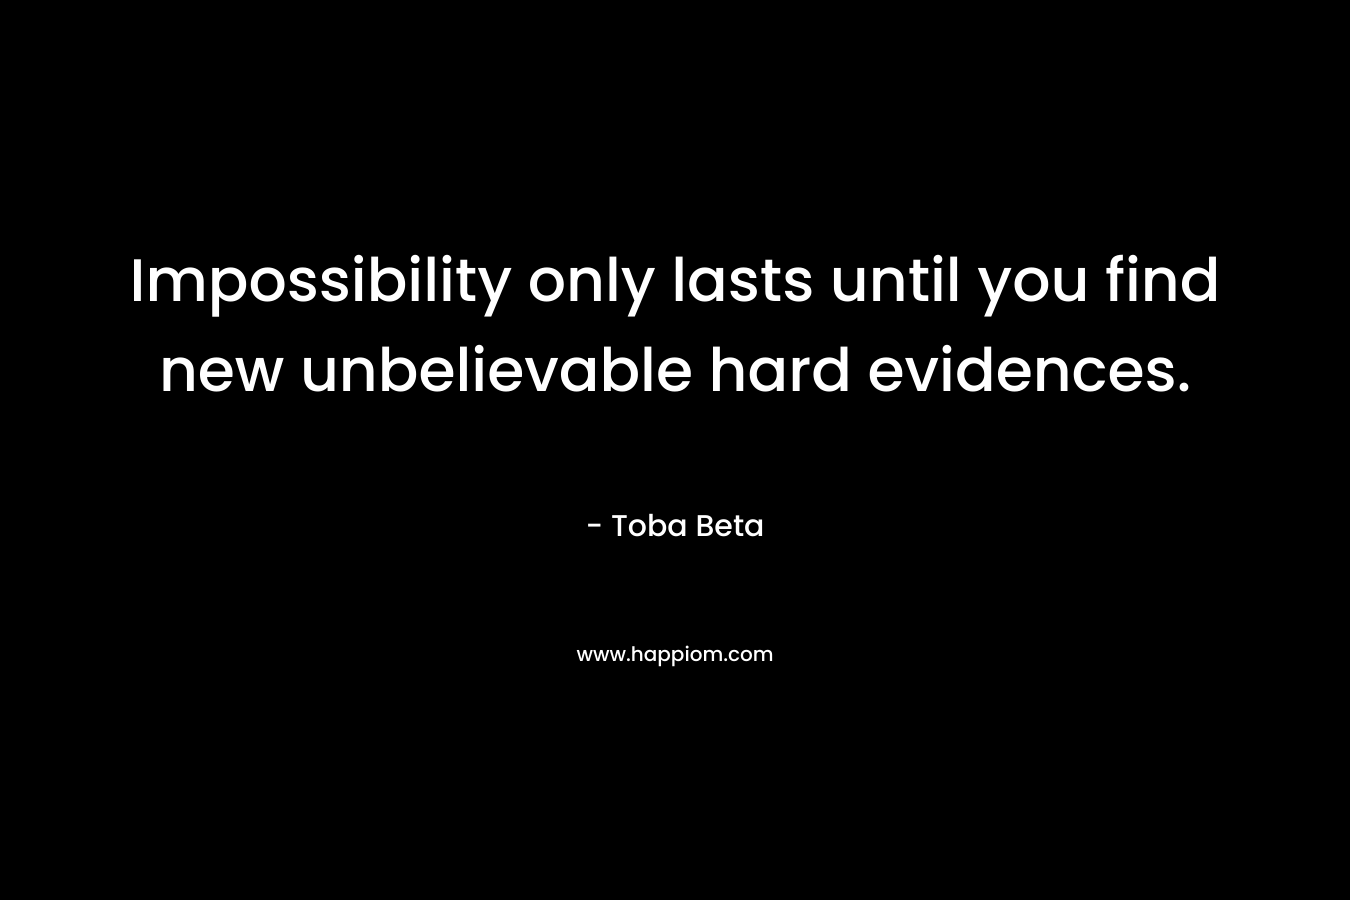 Impossibility only lasts until you find new unbelievable hard evidences.